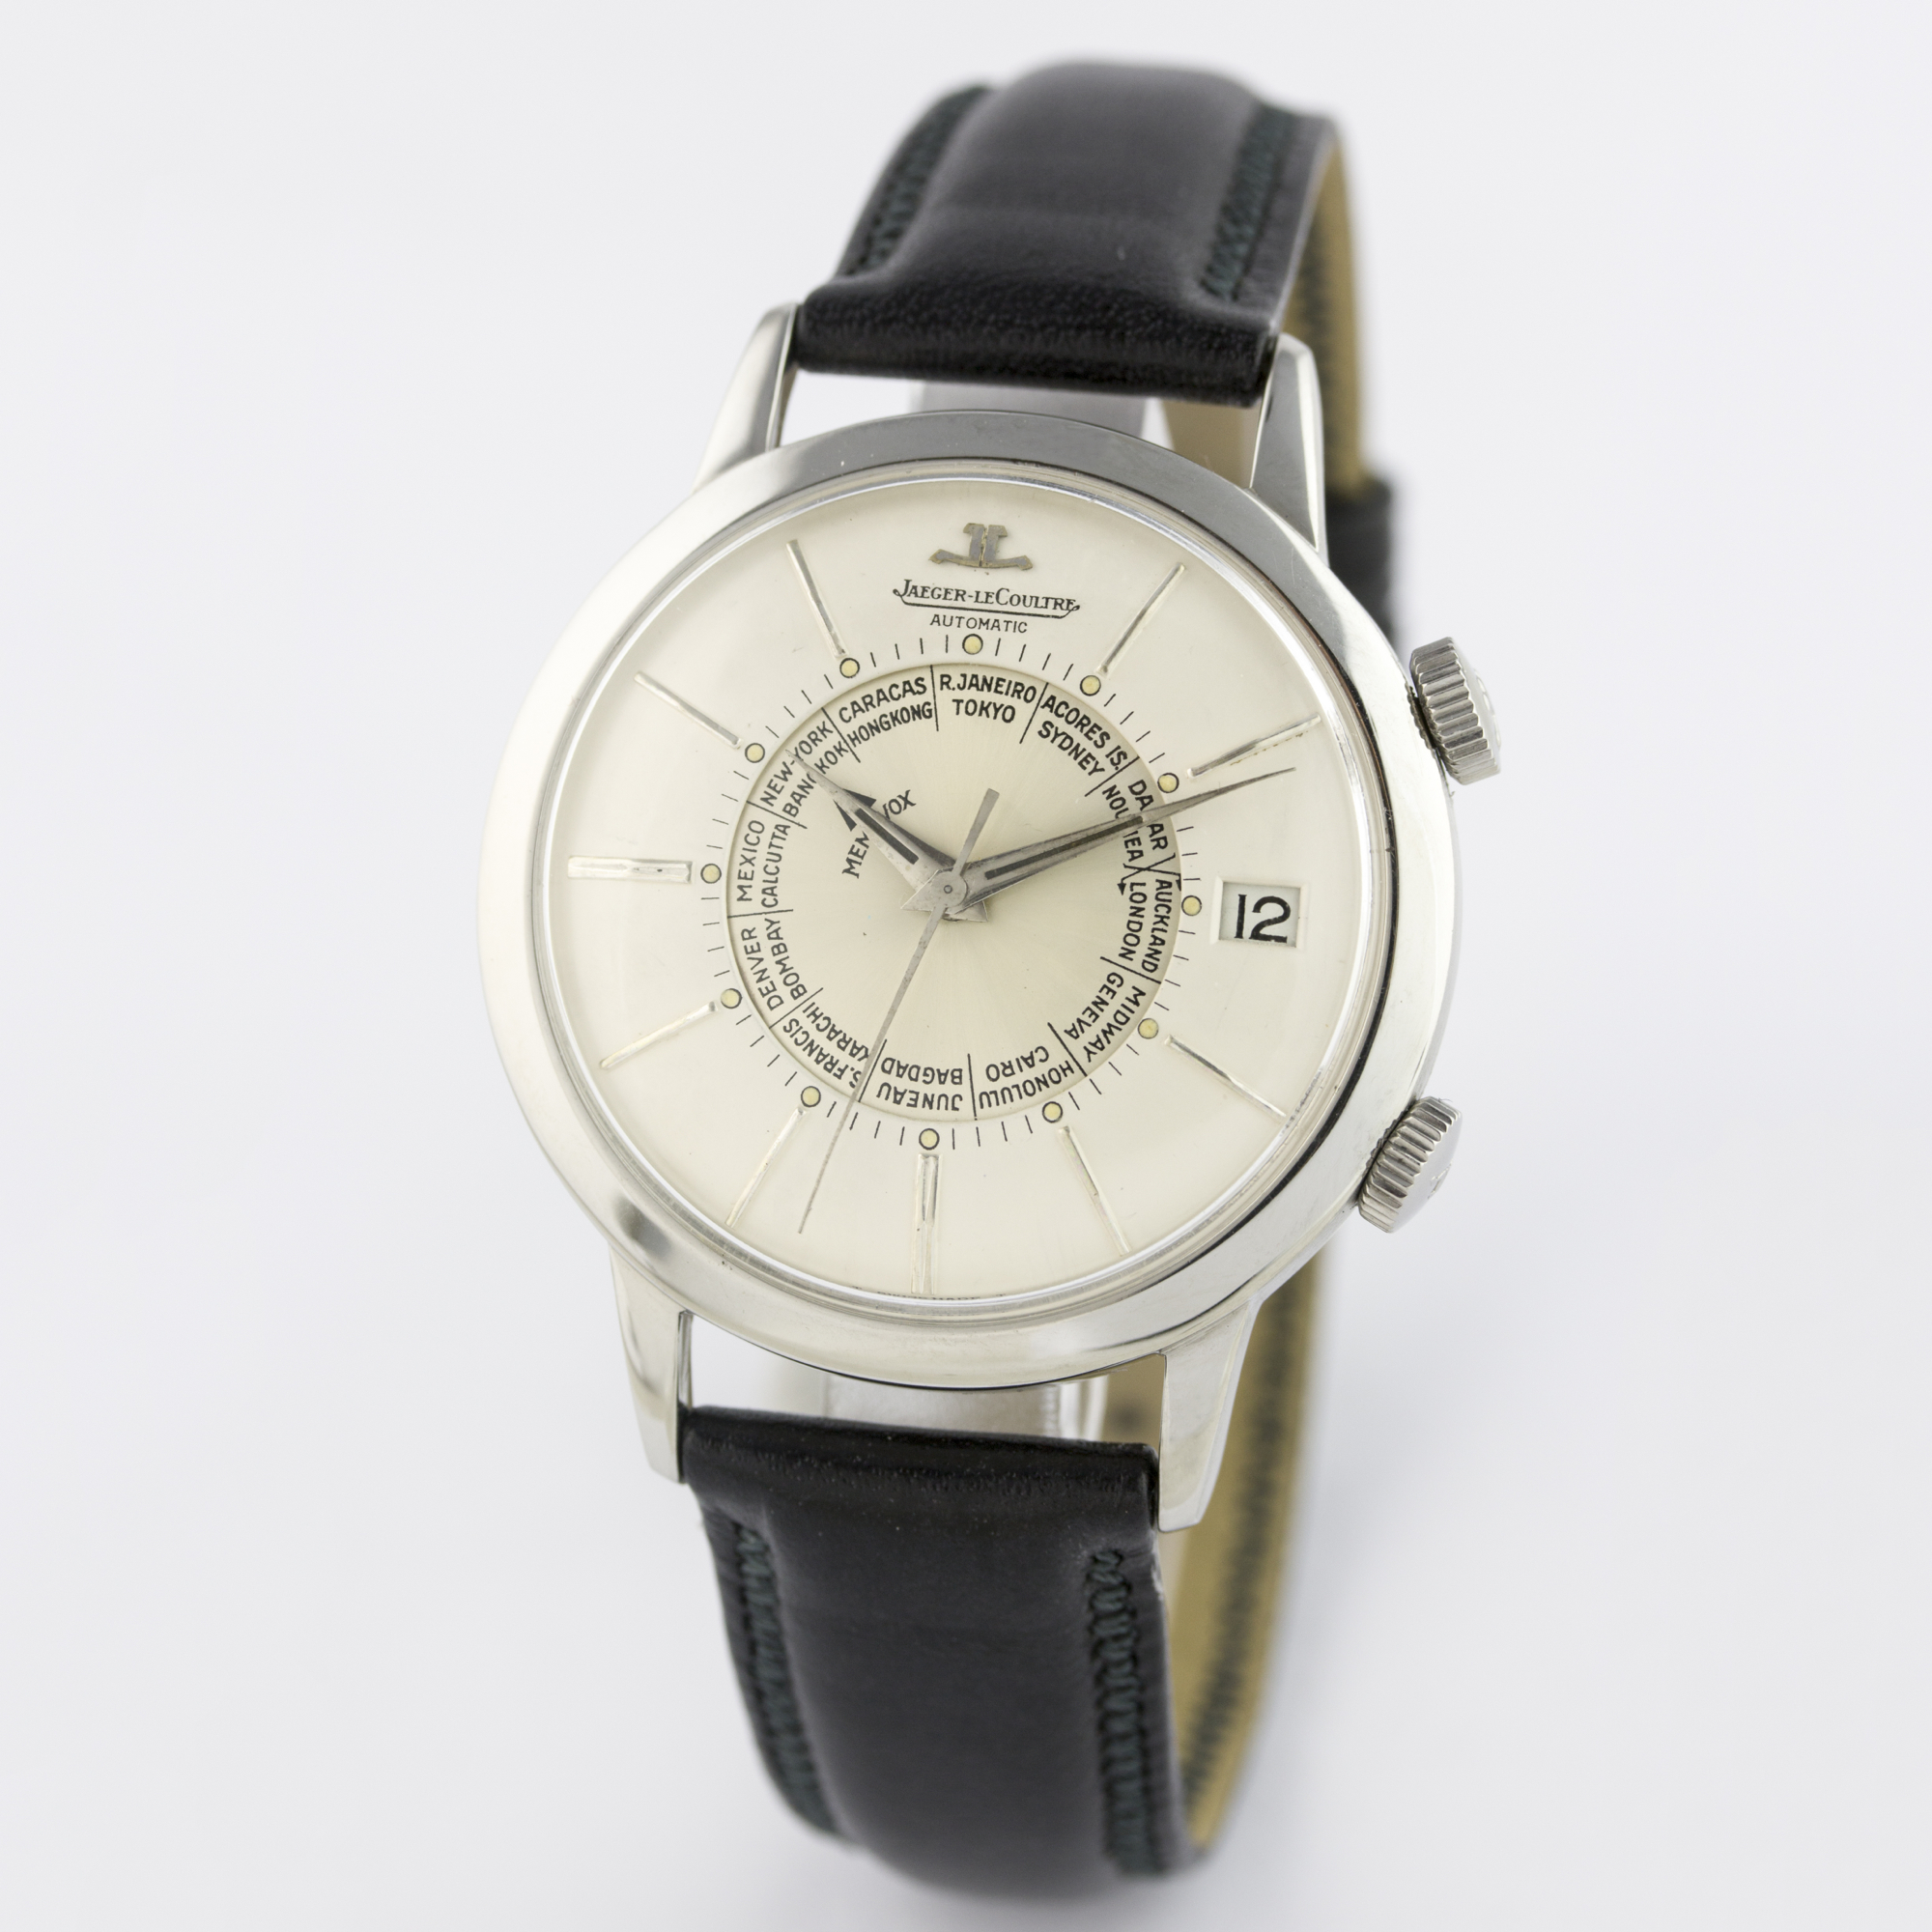 A GENTLEMAN'S STAINLESS STEEL JAEGER LECOULTRE AUTOMATIC MEMOVOX ALARM WRIST WATCH CIRCA 1960s D: - Image 2 of 7